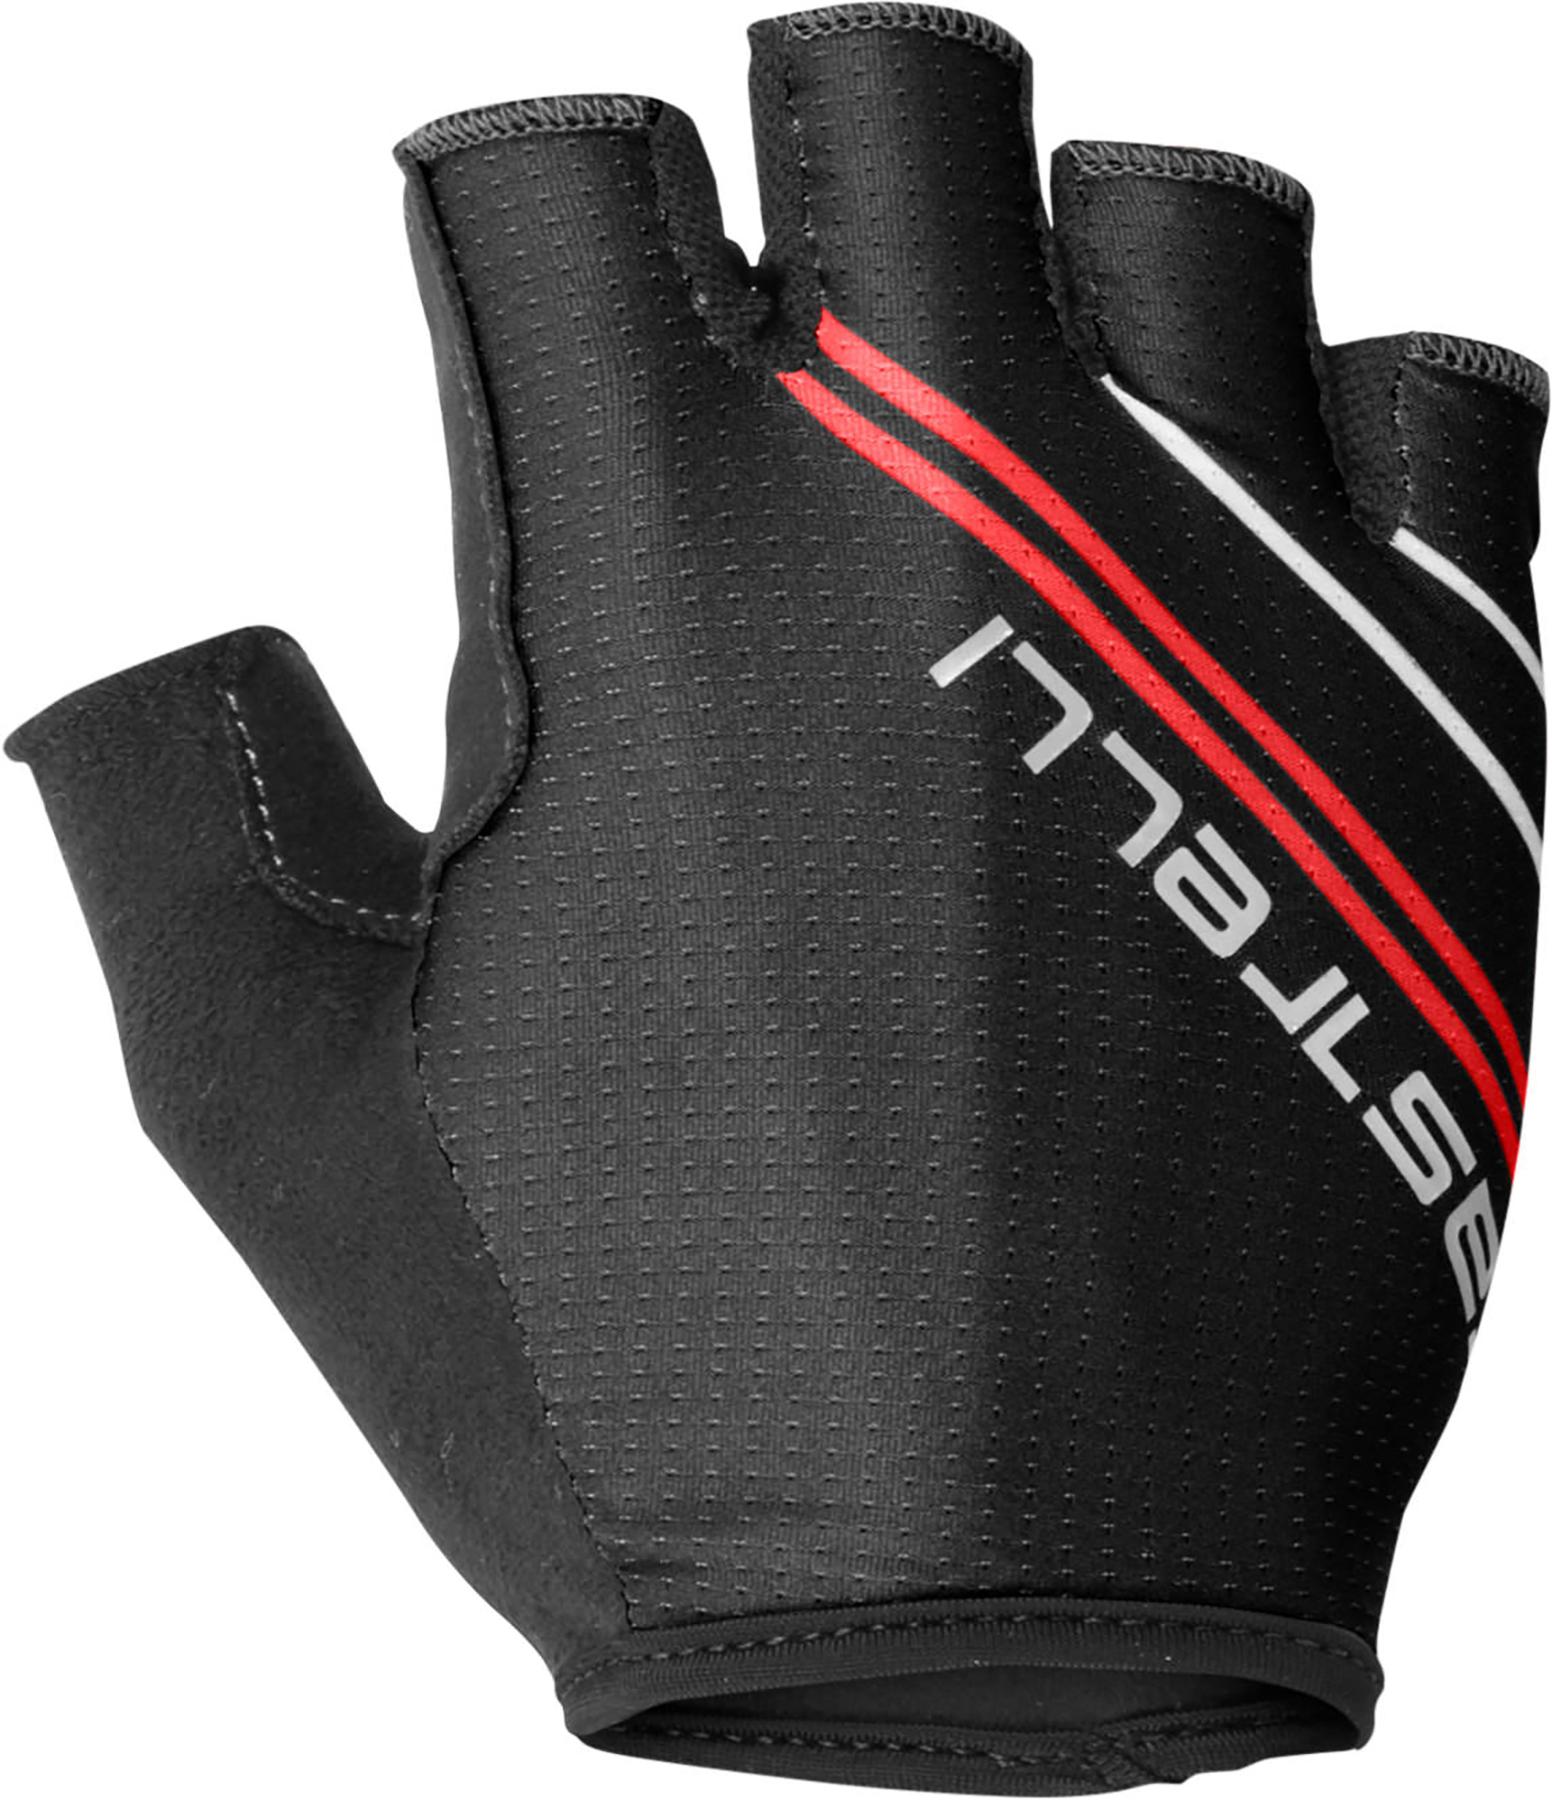 Castelli Womens Dolcissima 2 Cycling Gloves - Black